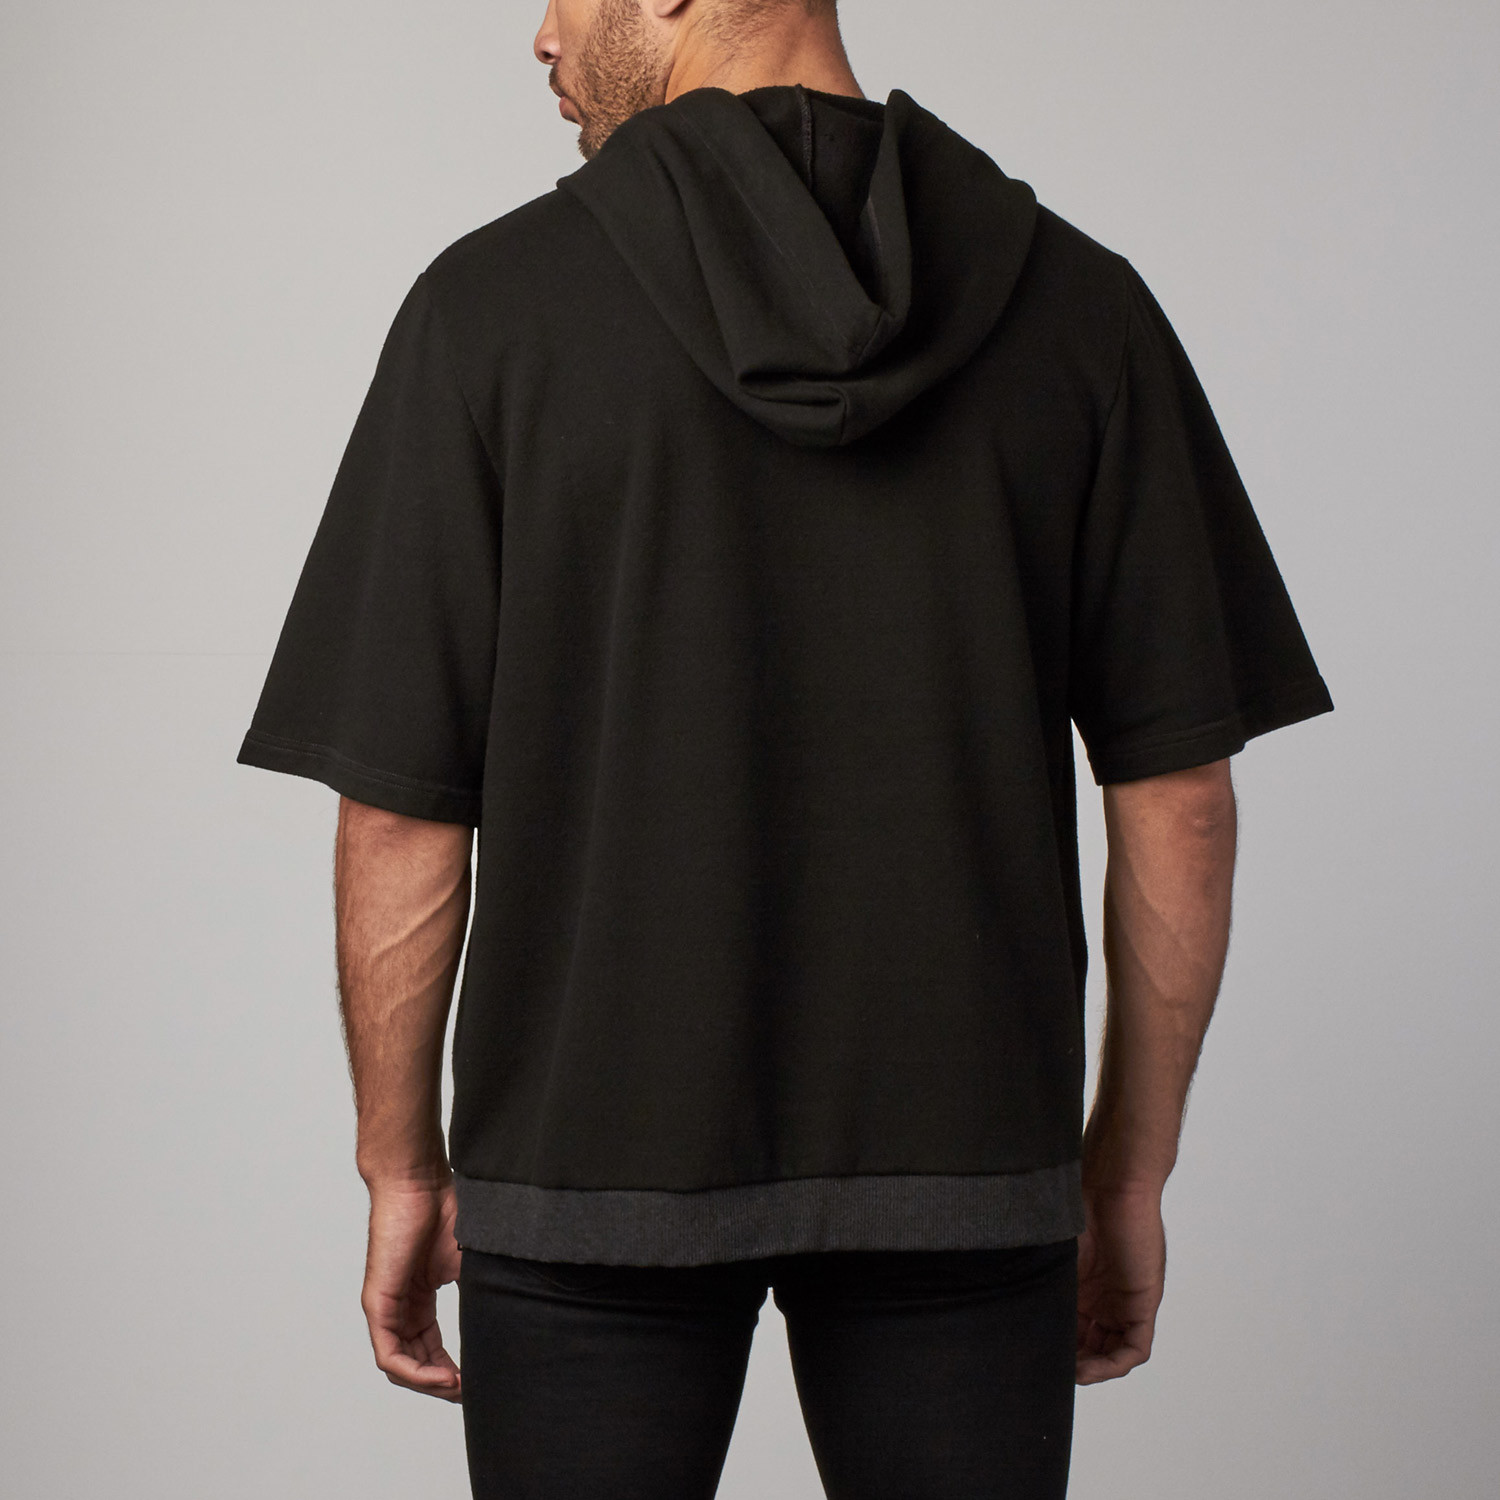 Oversized Short-Sleeve Hoodie // Black (XS) - The Project Garments ...